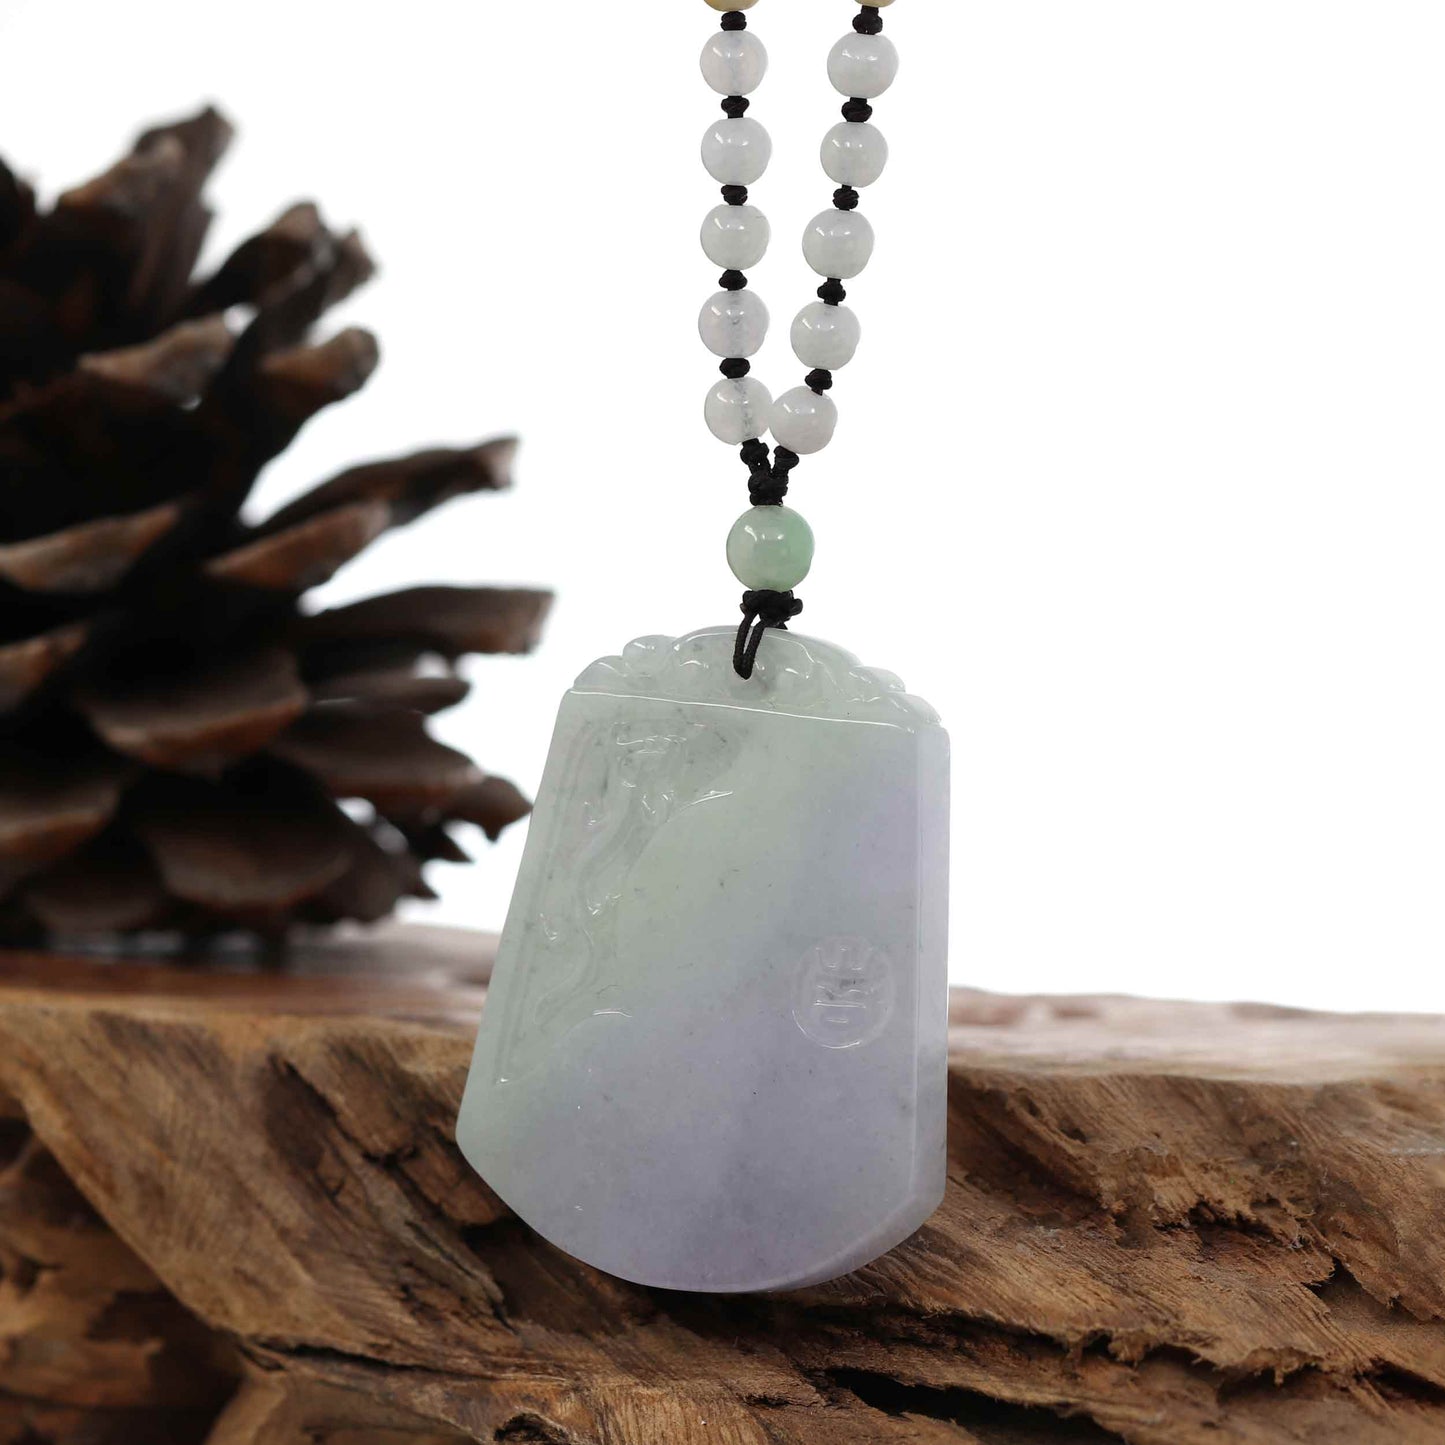 Genuine Lavender & Green Jadeite Jade "Good Luck & Safety" Pendant Necklace With Real Jadeite Bead Necklace